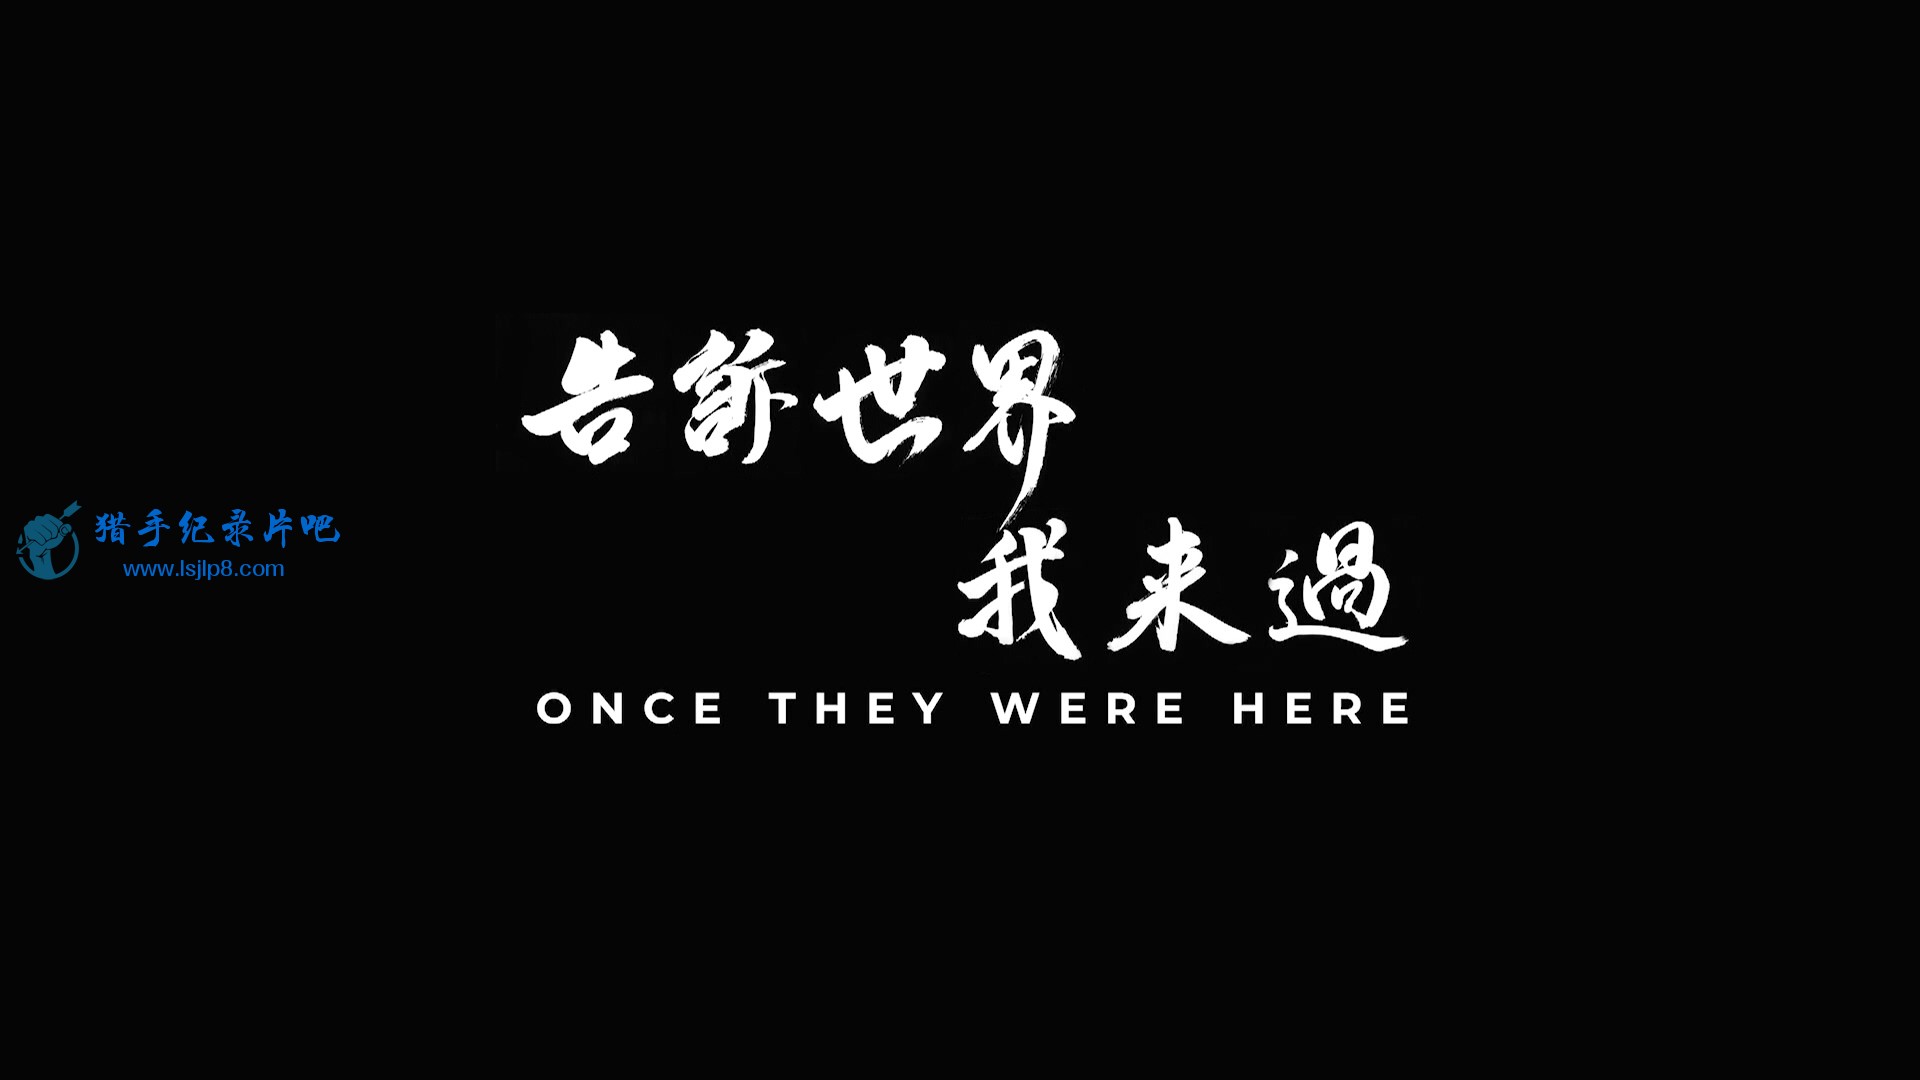 Once.They.Were.Here.2021.1080p.WEB-DL.AAC2.0.H.264-ae@MKVHome.mkv_20220115_181943.966.jpg